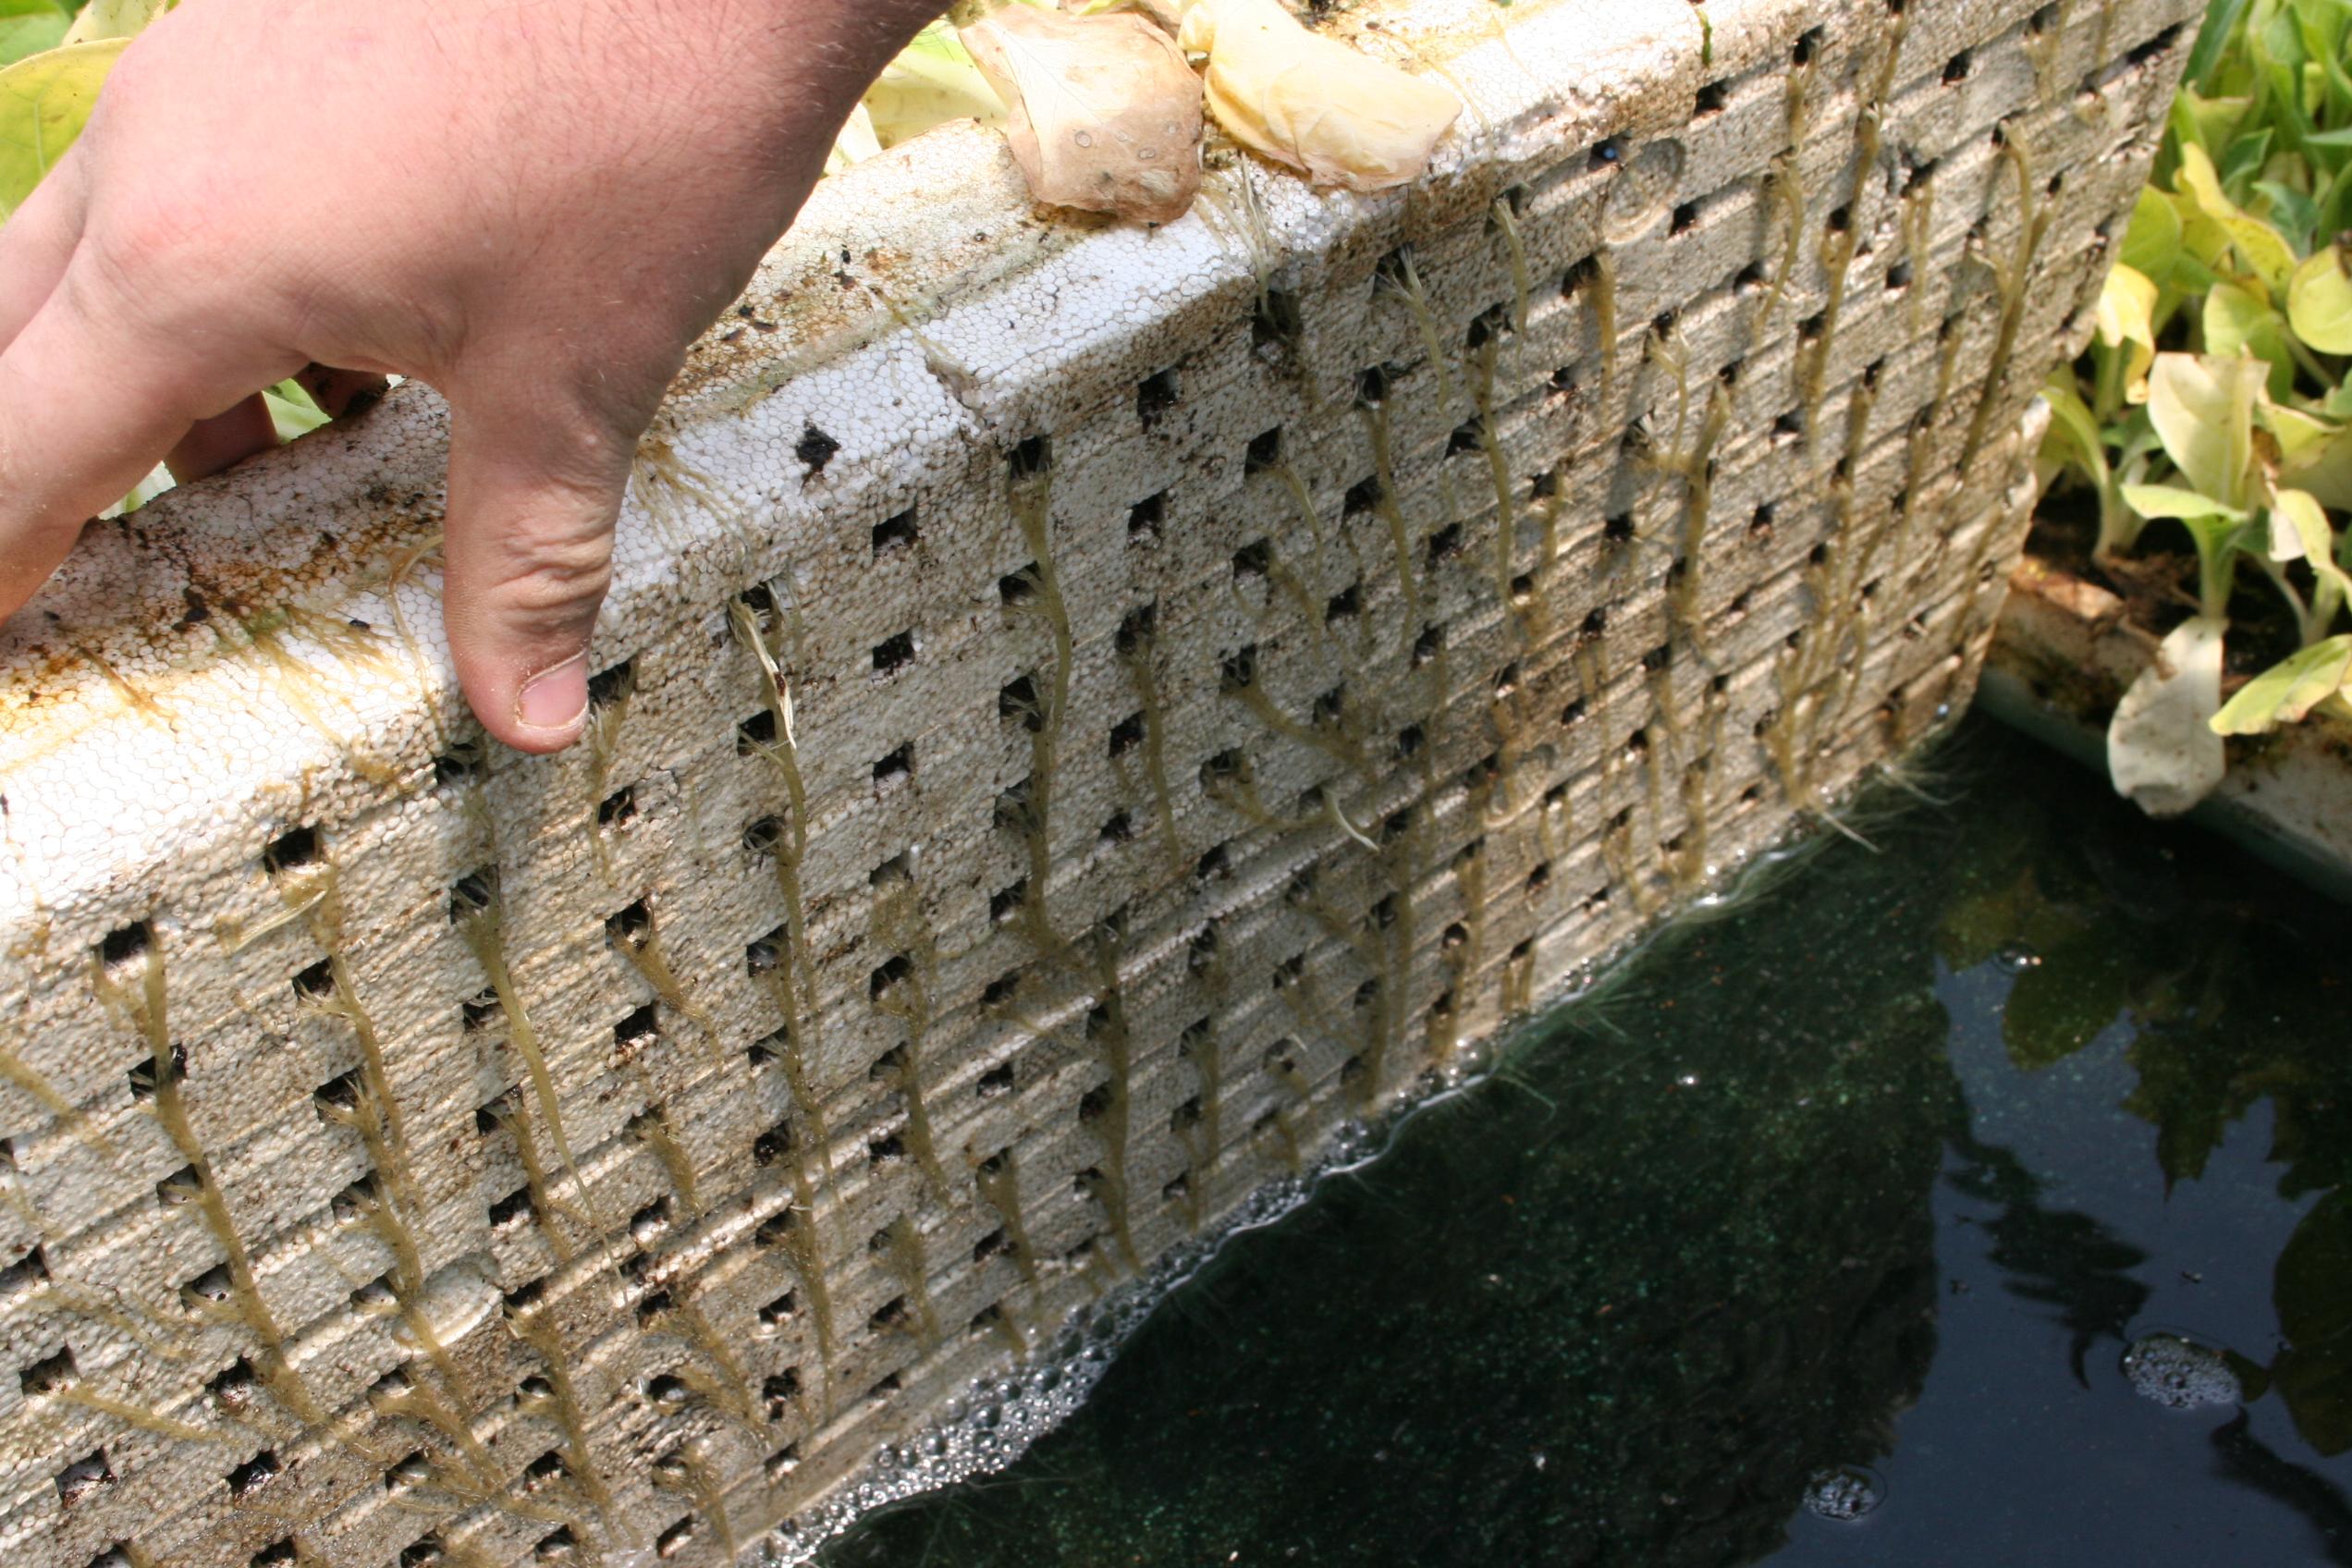 When infected with Pythium spp., roots extending into the float water are generally necrotic (brown) and limp due to decay.  Root decay reduces nutrient uptake, causing the foliar symptoms shown in the previous images.  This disease often starts from contaminated float trays and can quickly spread throughout a float bed. (Photo: Kenneth Seebold, UK) 